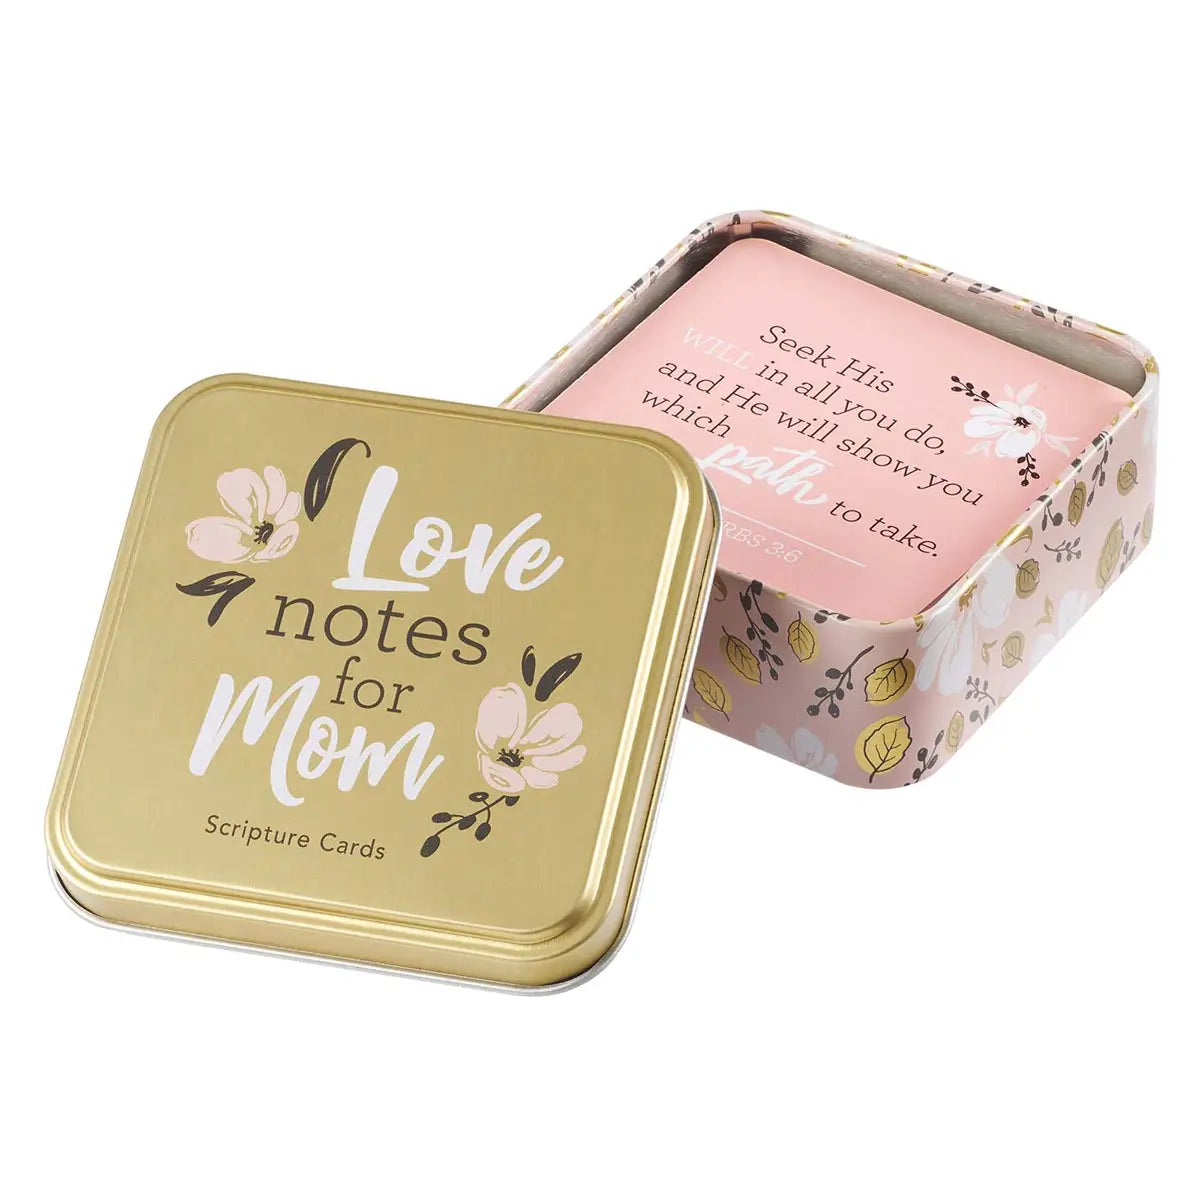 Love Notes for Mom Scripture Cards in Tin